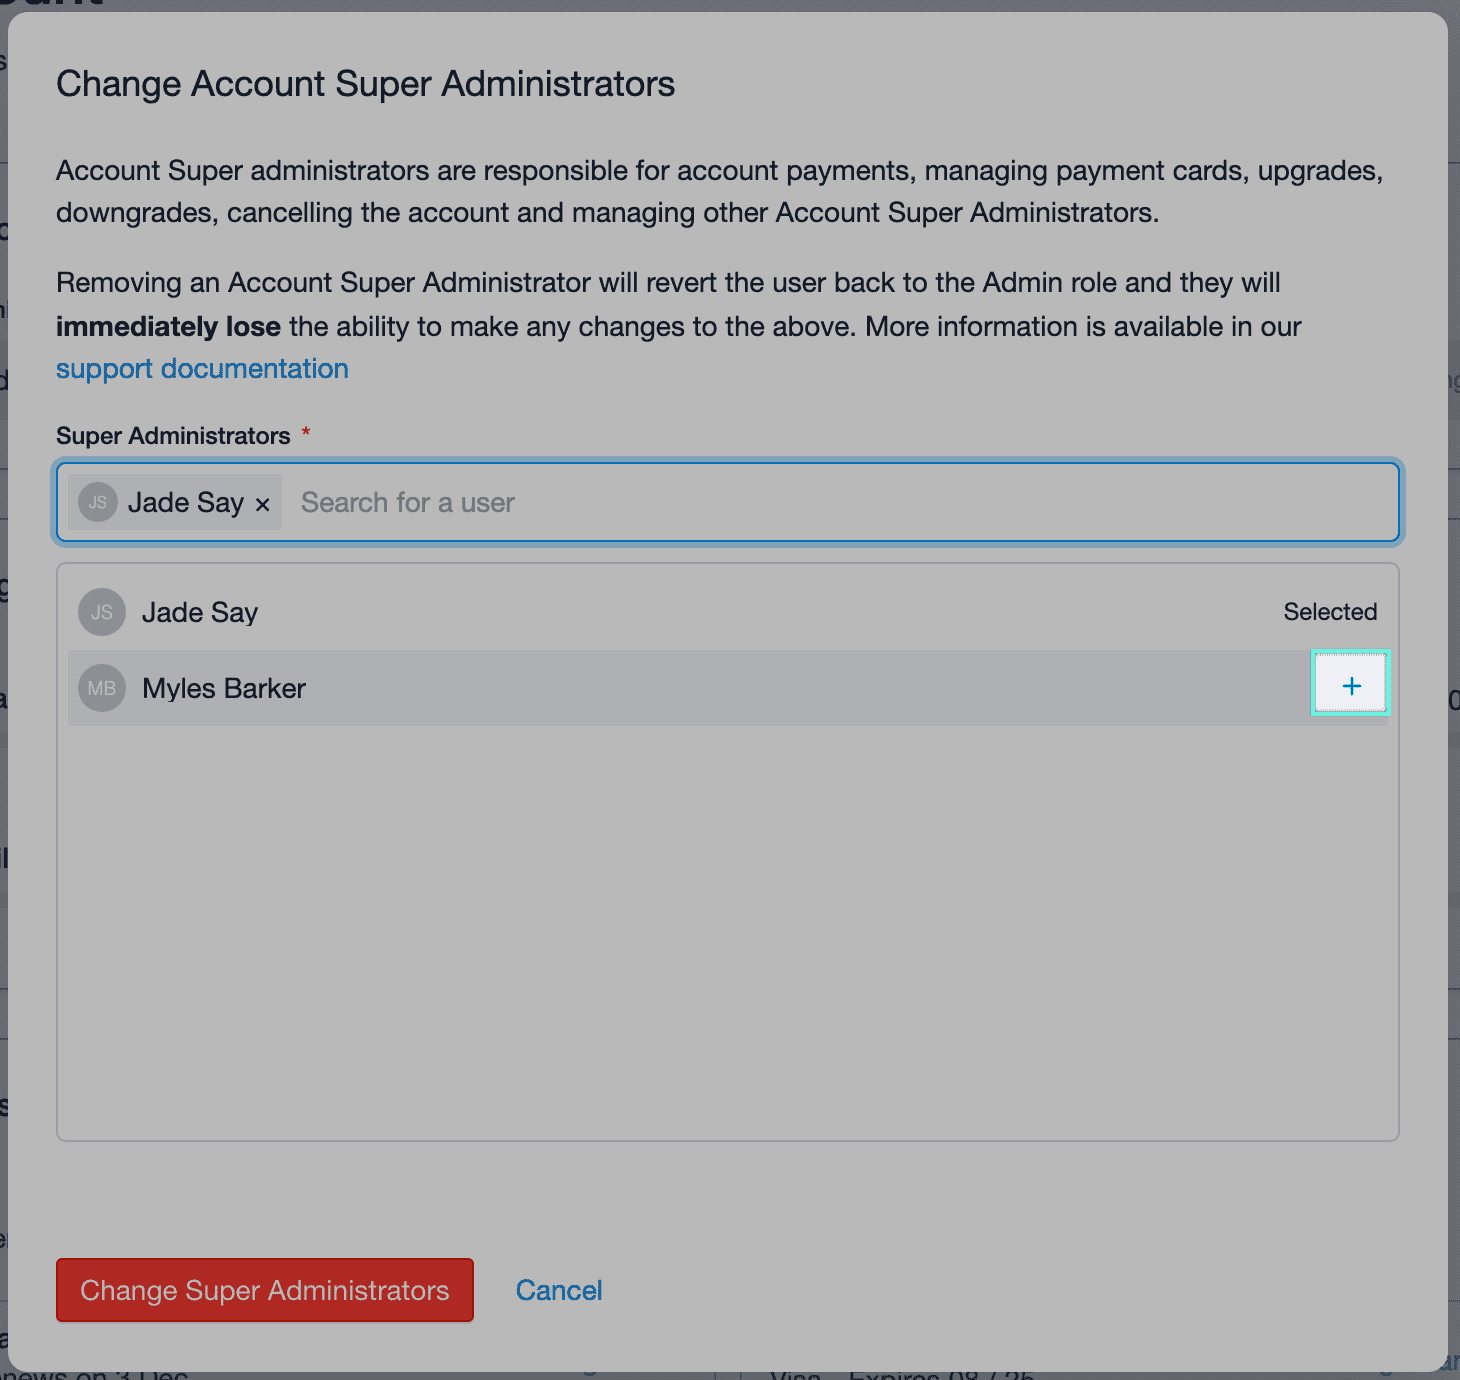 modal for changing account super administrator, showing list of users that can be added using a + icon in order to add multiple Super Administrators